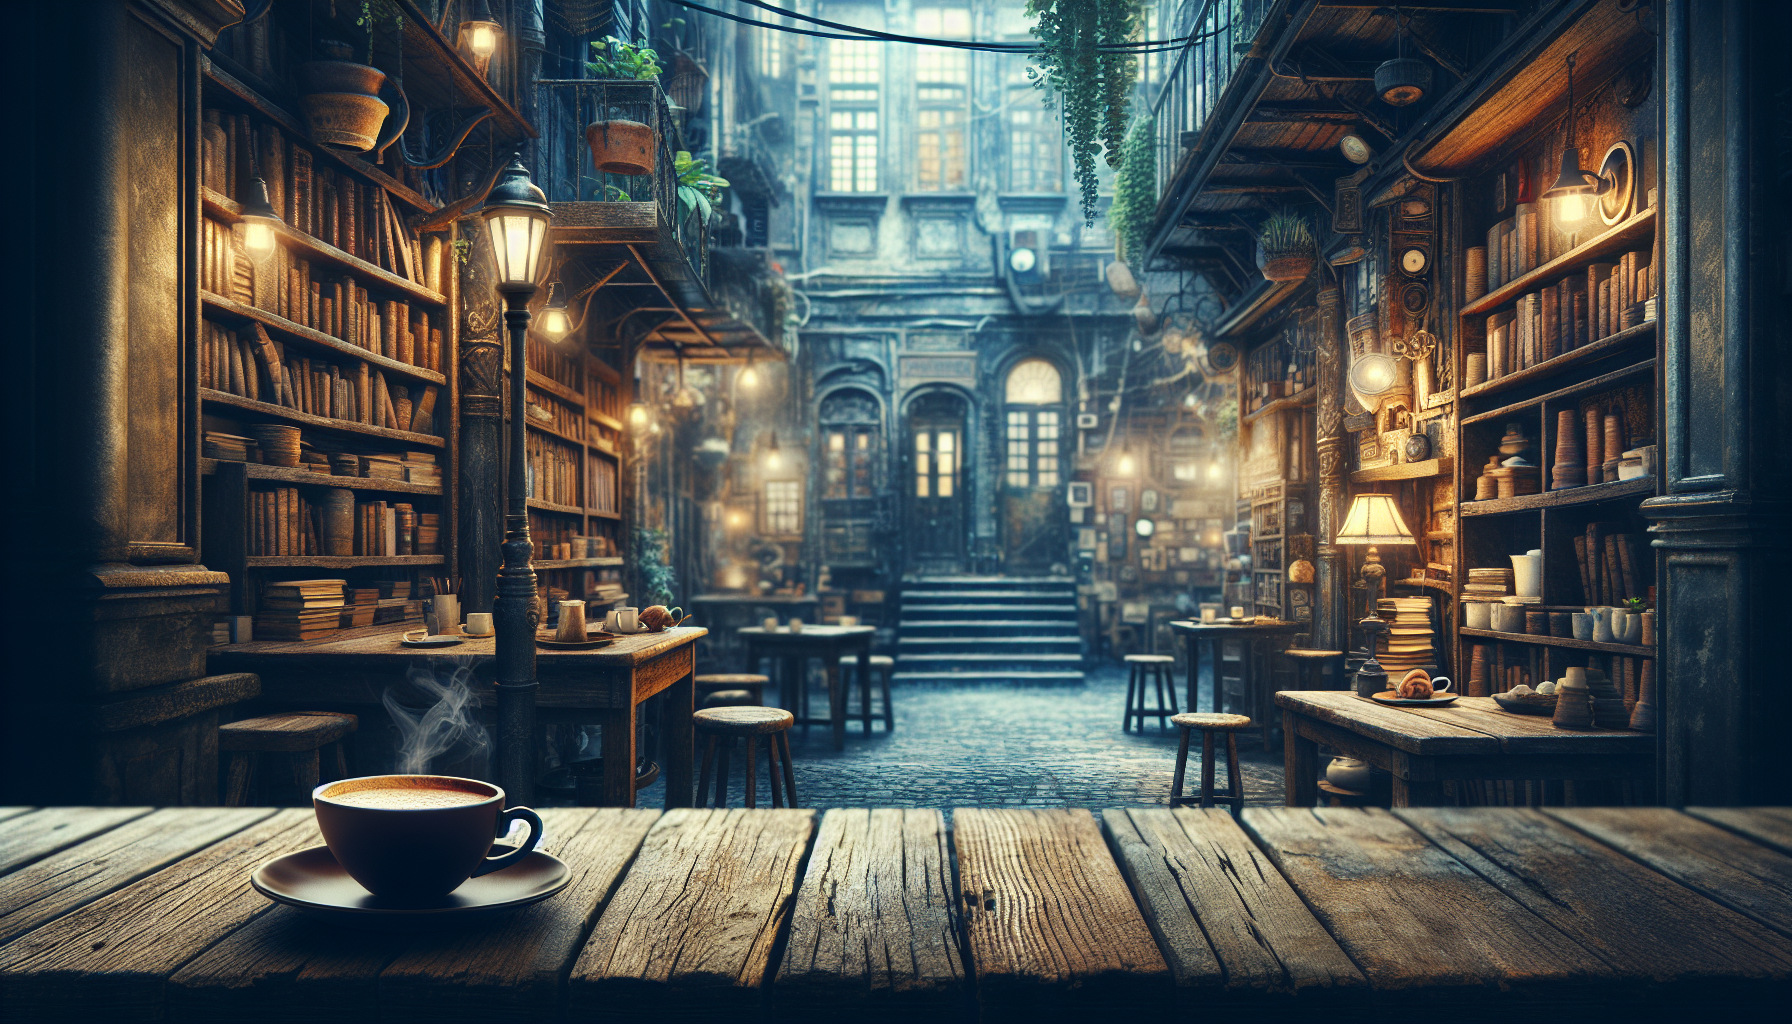 Where Can I Discover Secret Coffee Shops Or Cafes With A Unique Atmosphere?